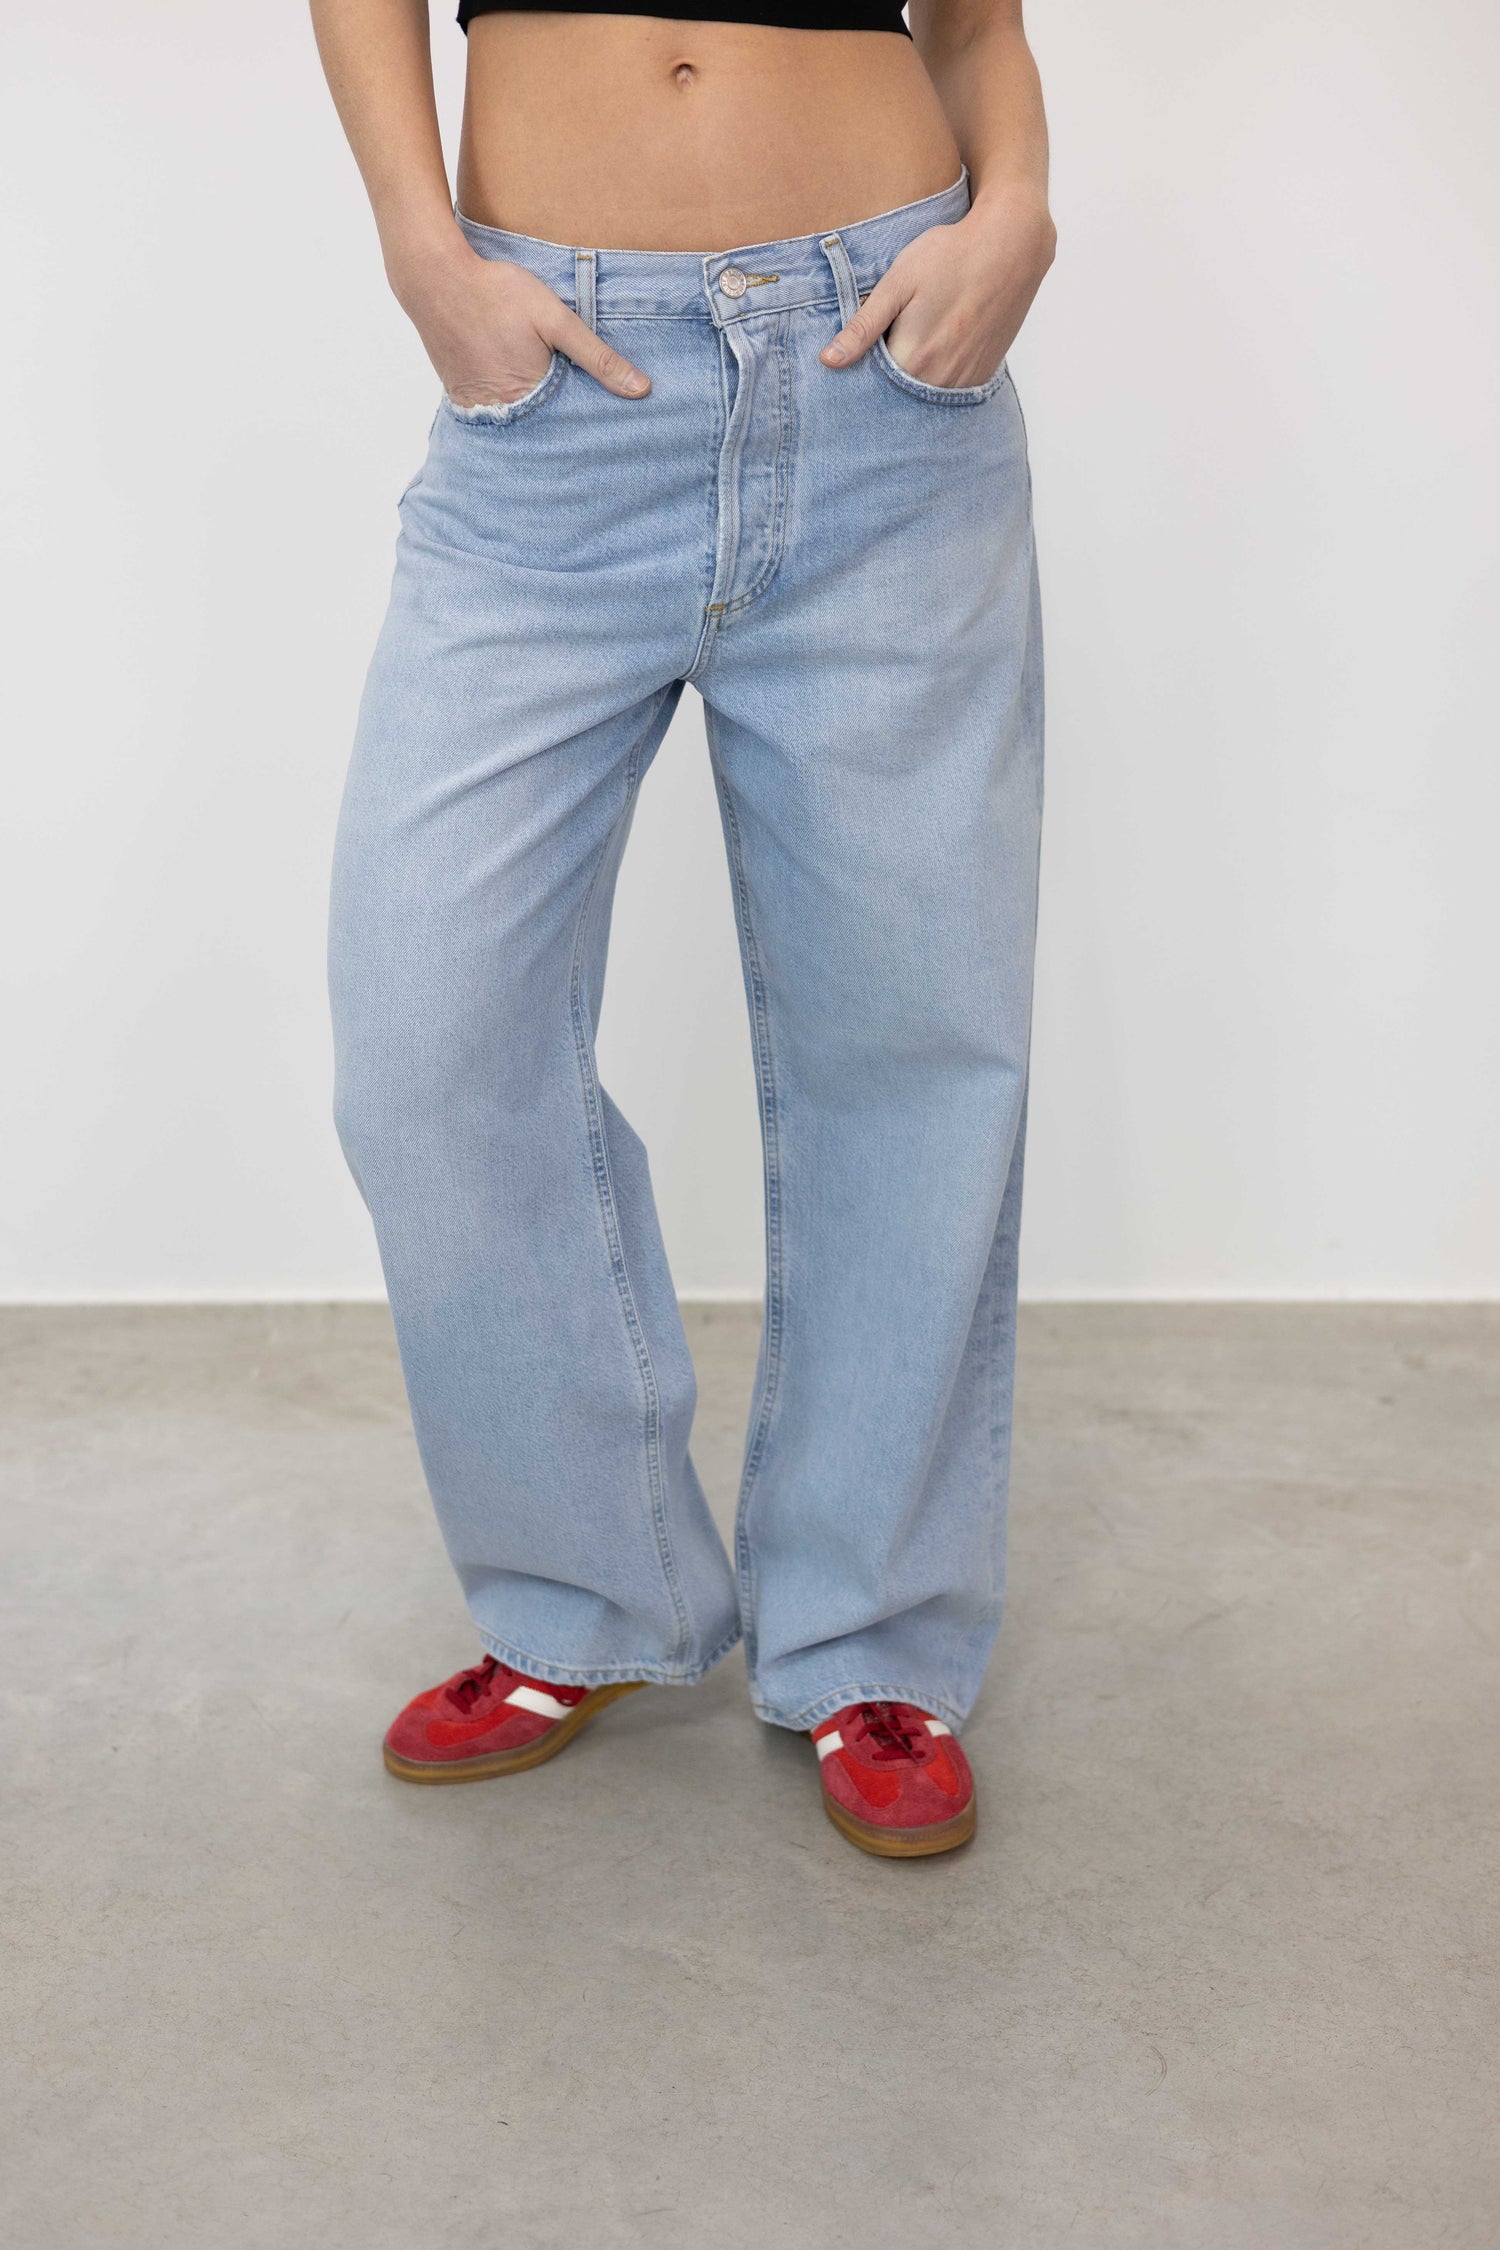 LOW SLUNG BAGGY JEANS IN FRAGMENT JEANS AGOLDE 